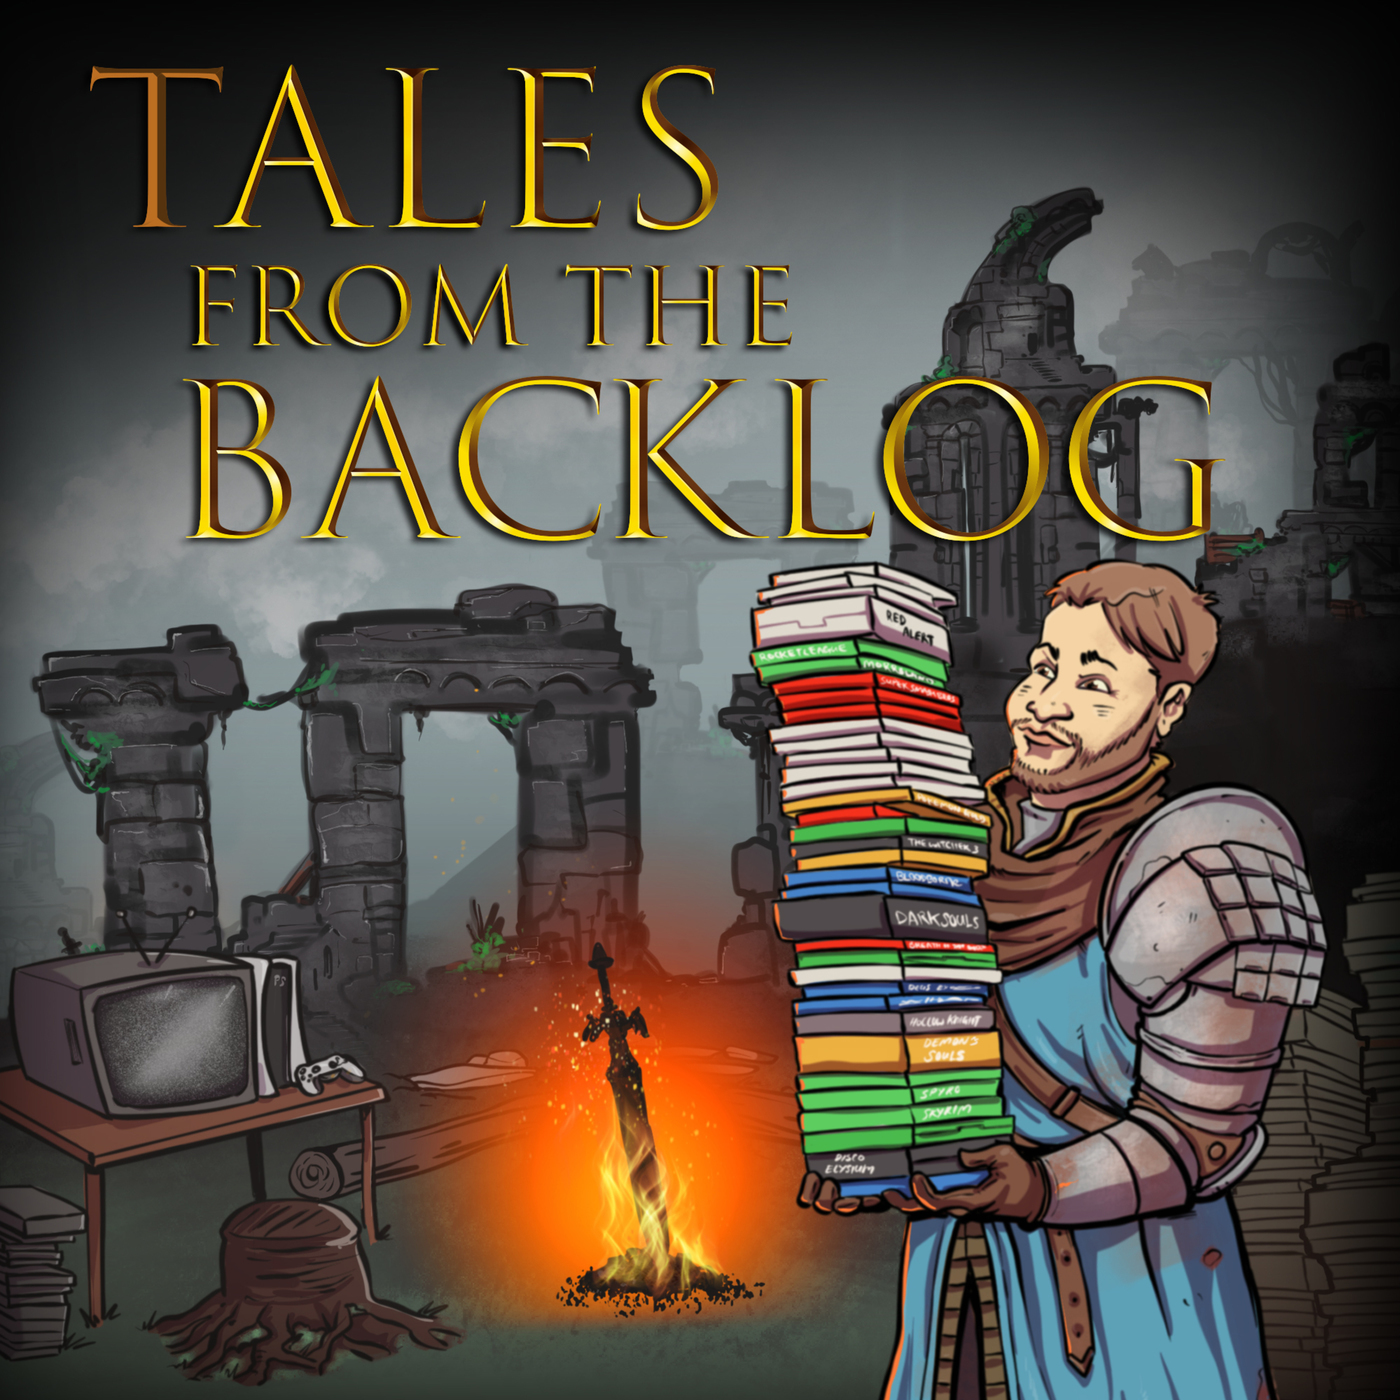 Tales from the Backlog: "Uncommon" Real-World Settings in Video Games (with Ozzy Garcia & Randall Quiggle)